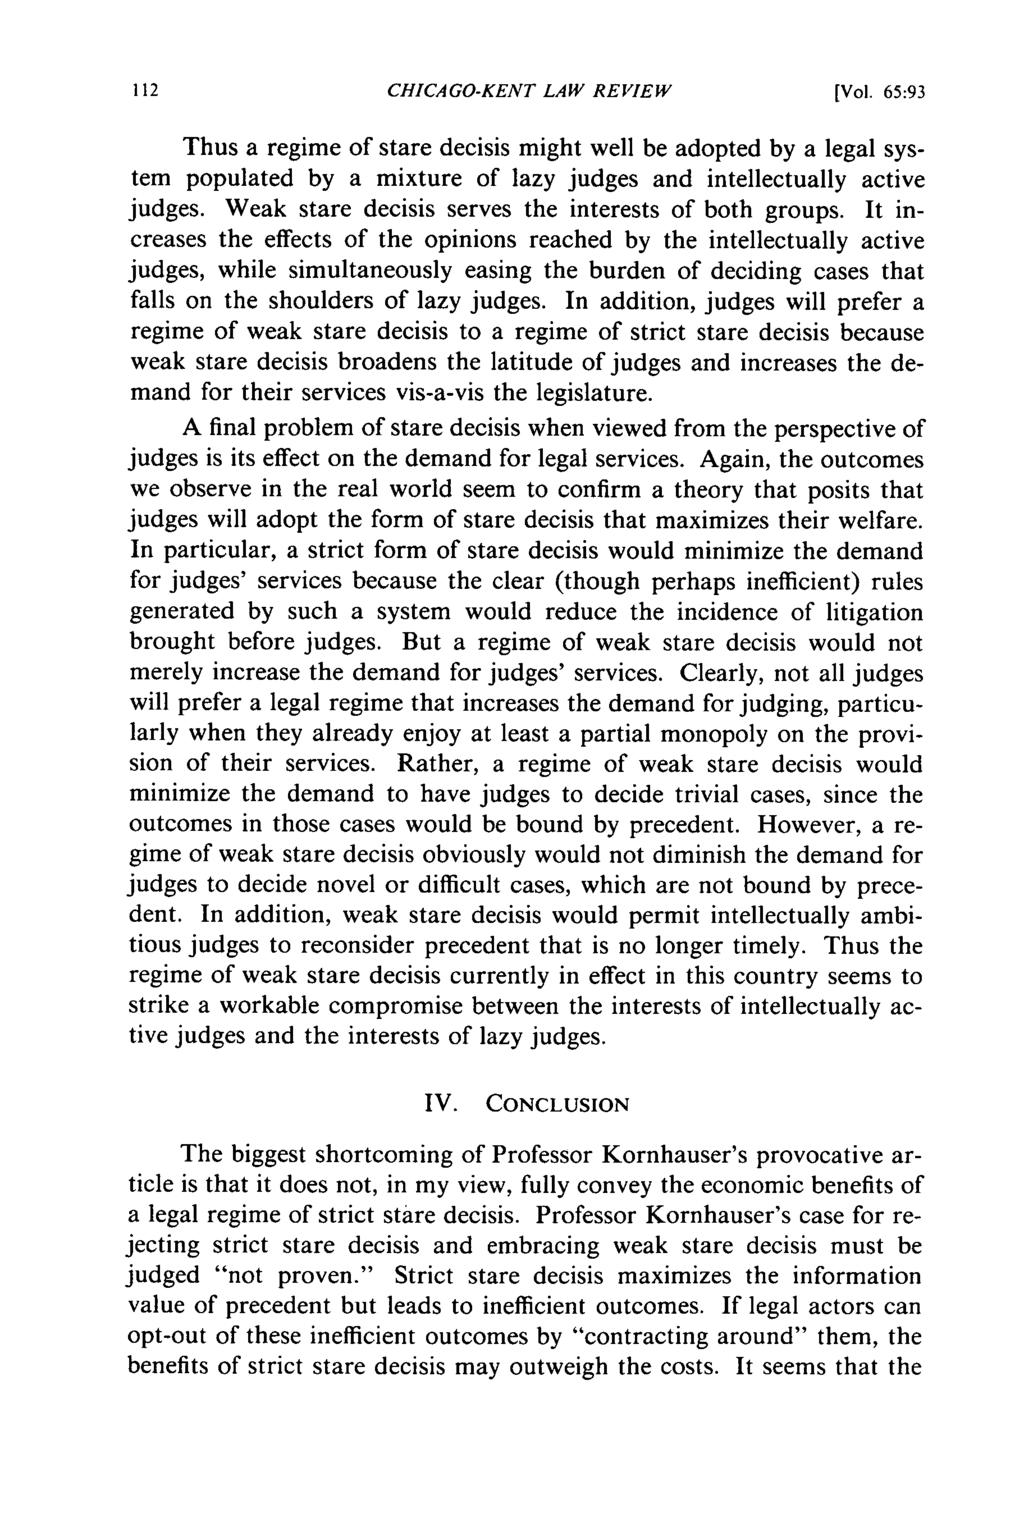 CHICAGO-KENT LAW REVIEW [Vol. 65:93 Thus a regime of stare decisis might well be adopted by a legal system populated by a mixture of lazy judges and intellectually active judges.